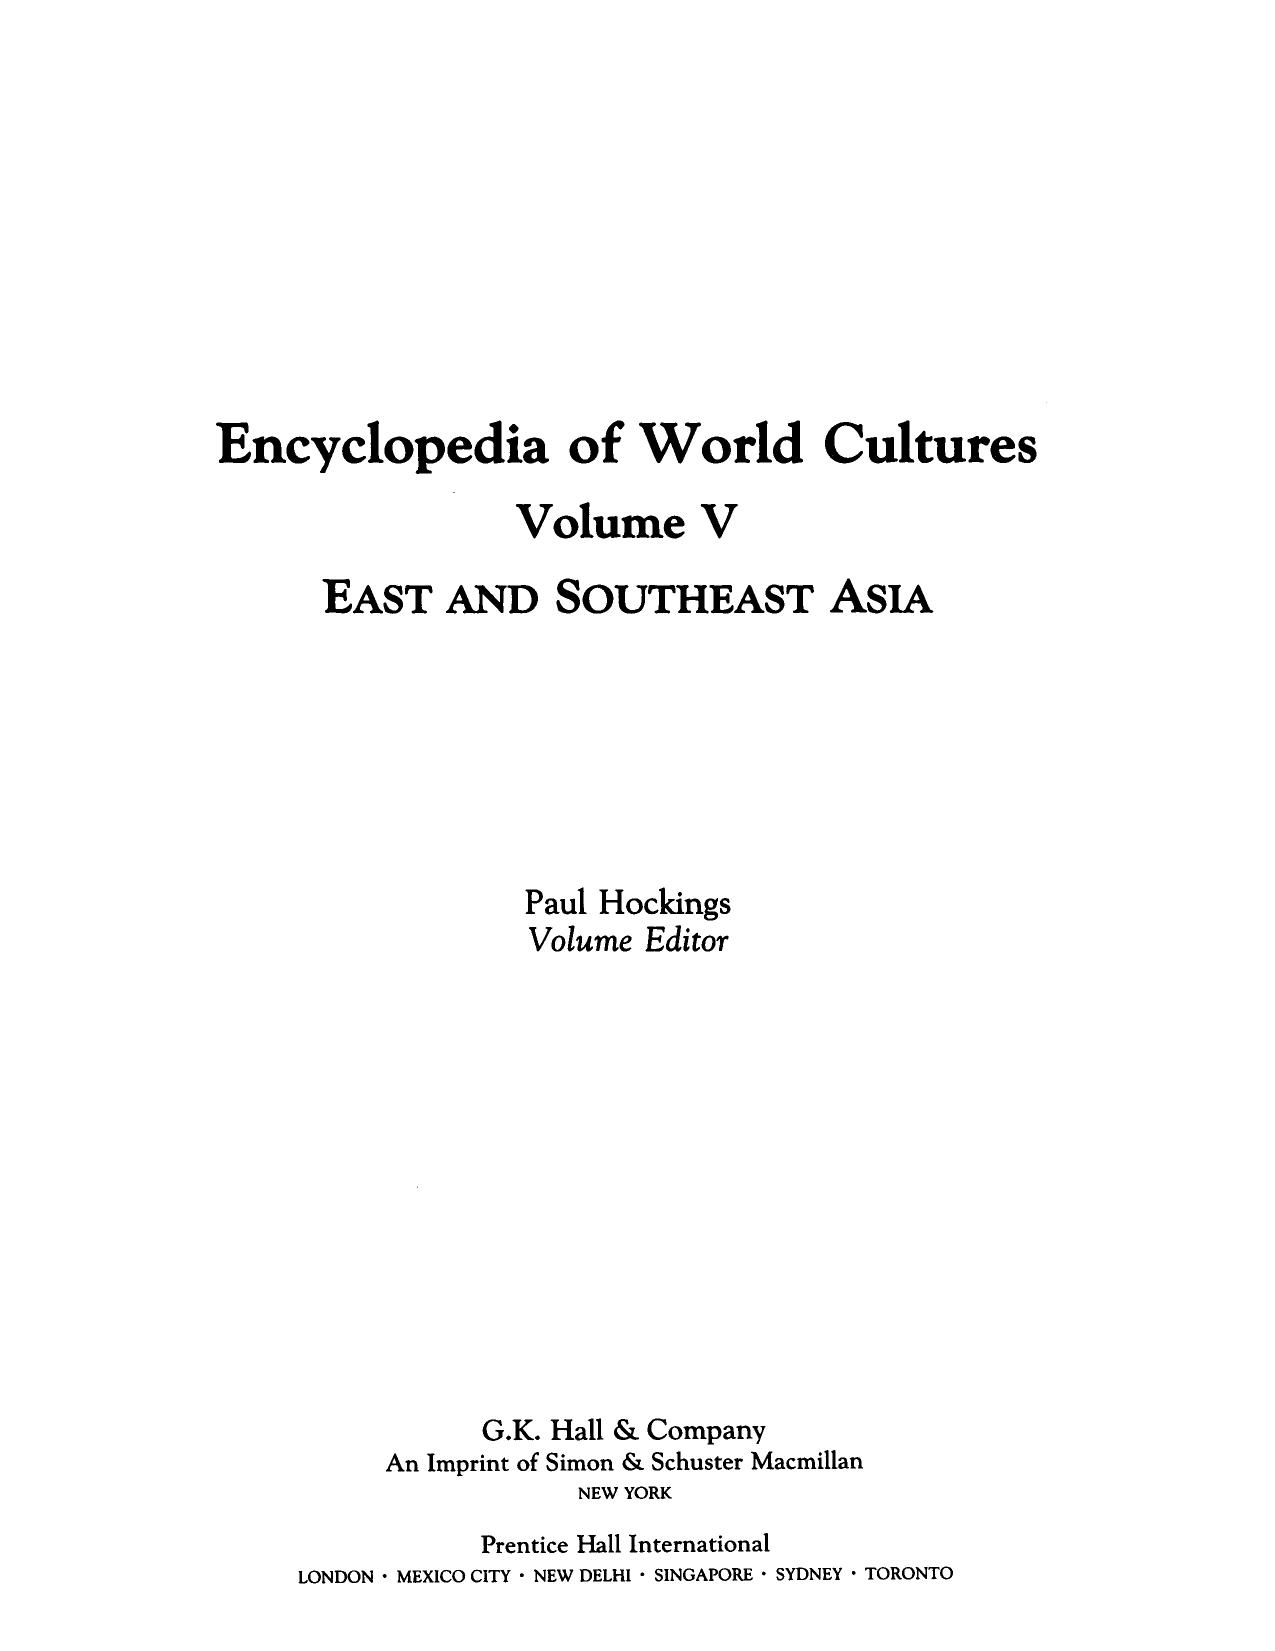 Encyclopedia of World Cultures Southeast and East Asia Soviet Union, China and Eastern Europe, Vol. 5